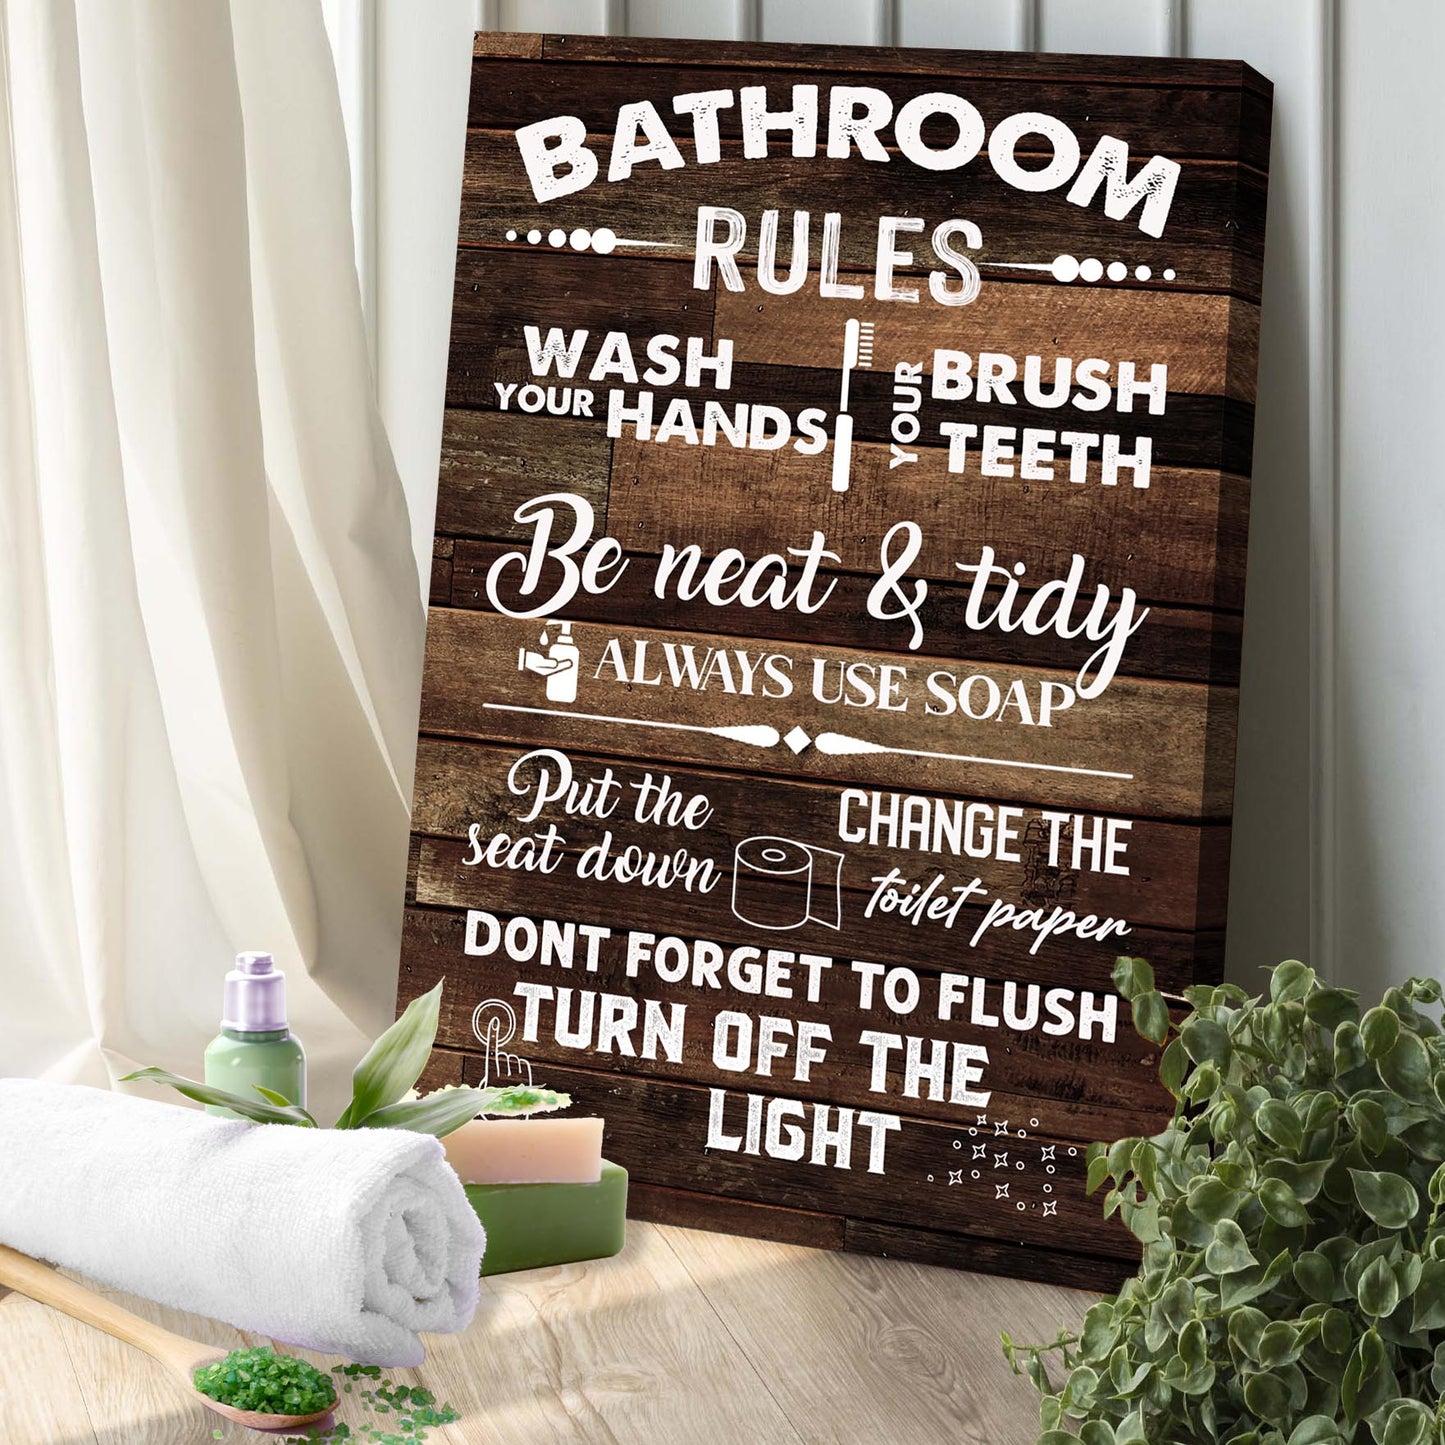 Family Bathroom Rules Sign - Image by Tailored Canvases